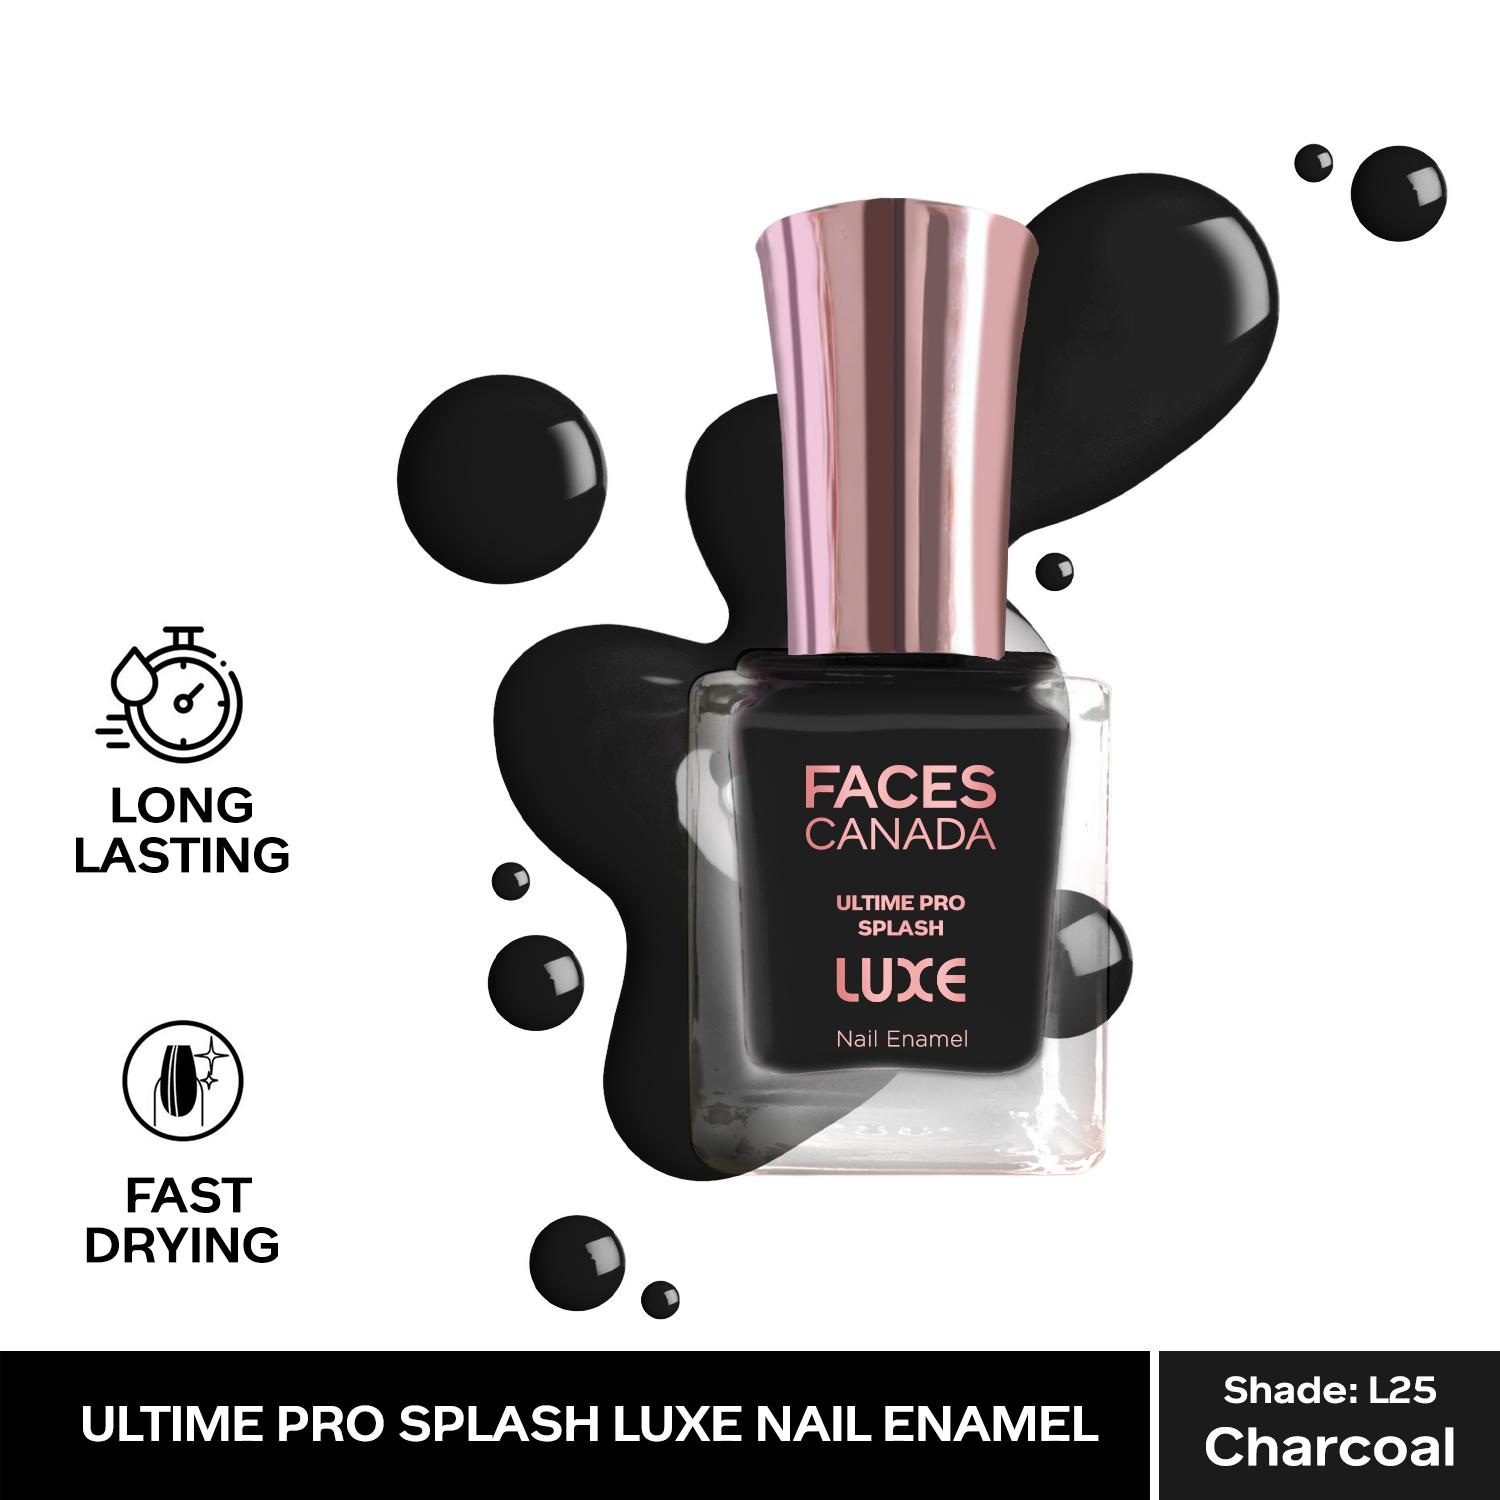 Faces Canada | Faces Canada Ultime Pro Splash Luxe Nail Enamel - Charcoal (L25), Glossy Finish (12 ml)